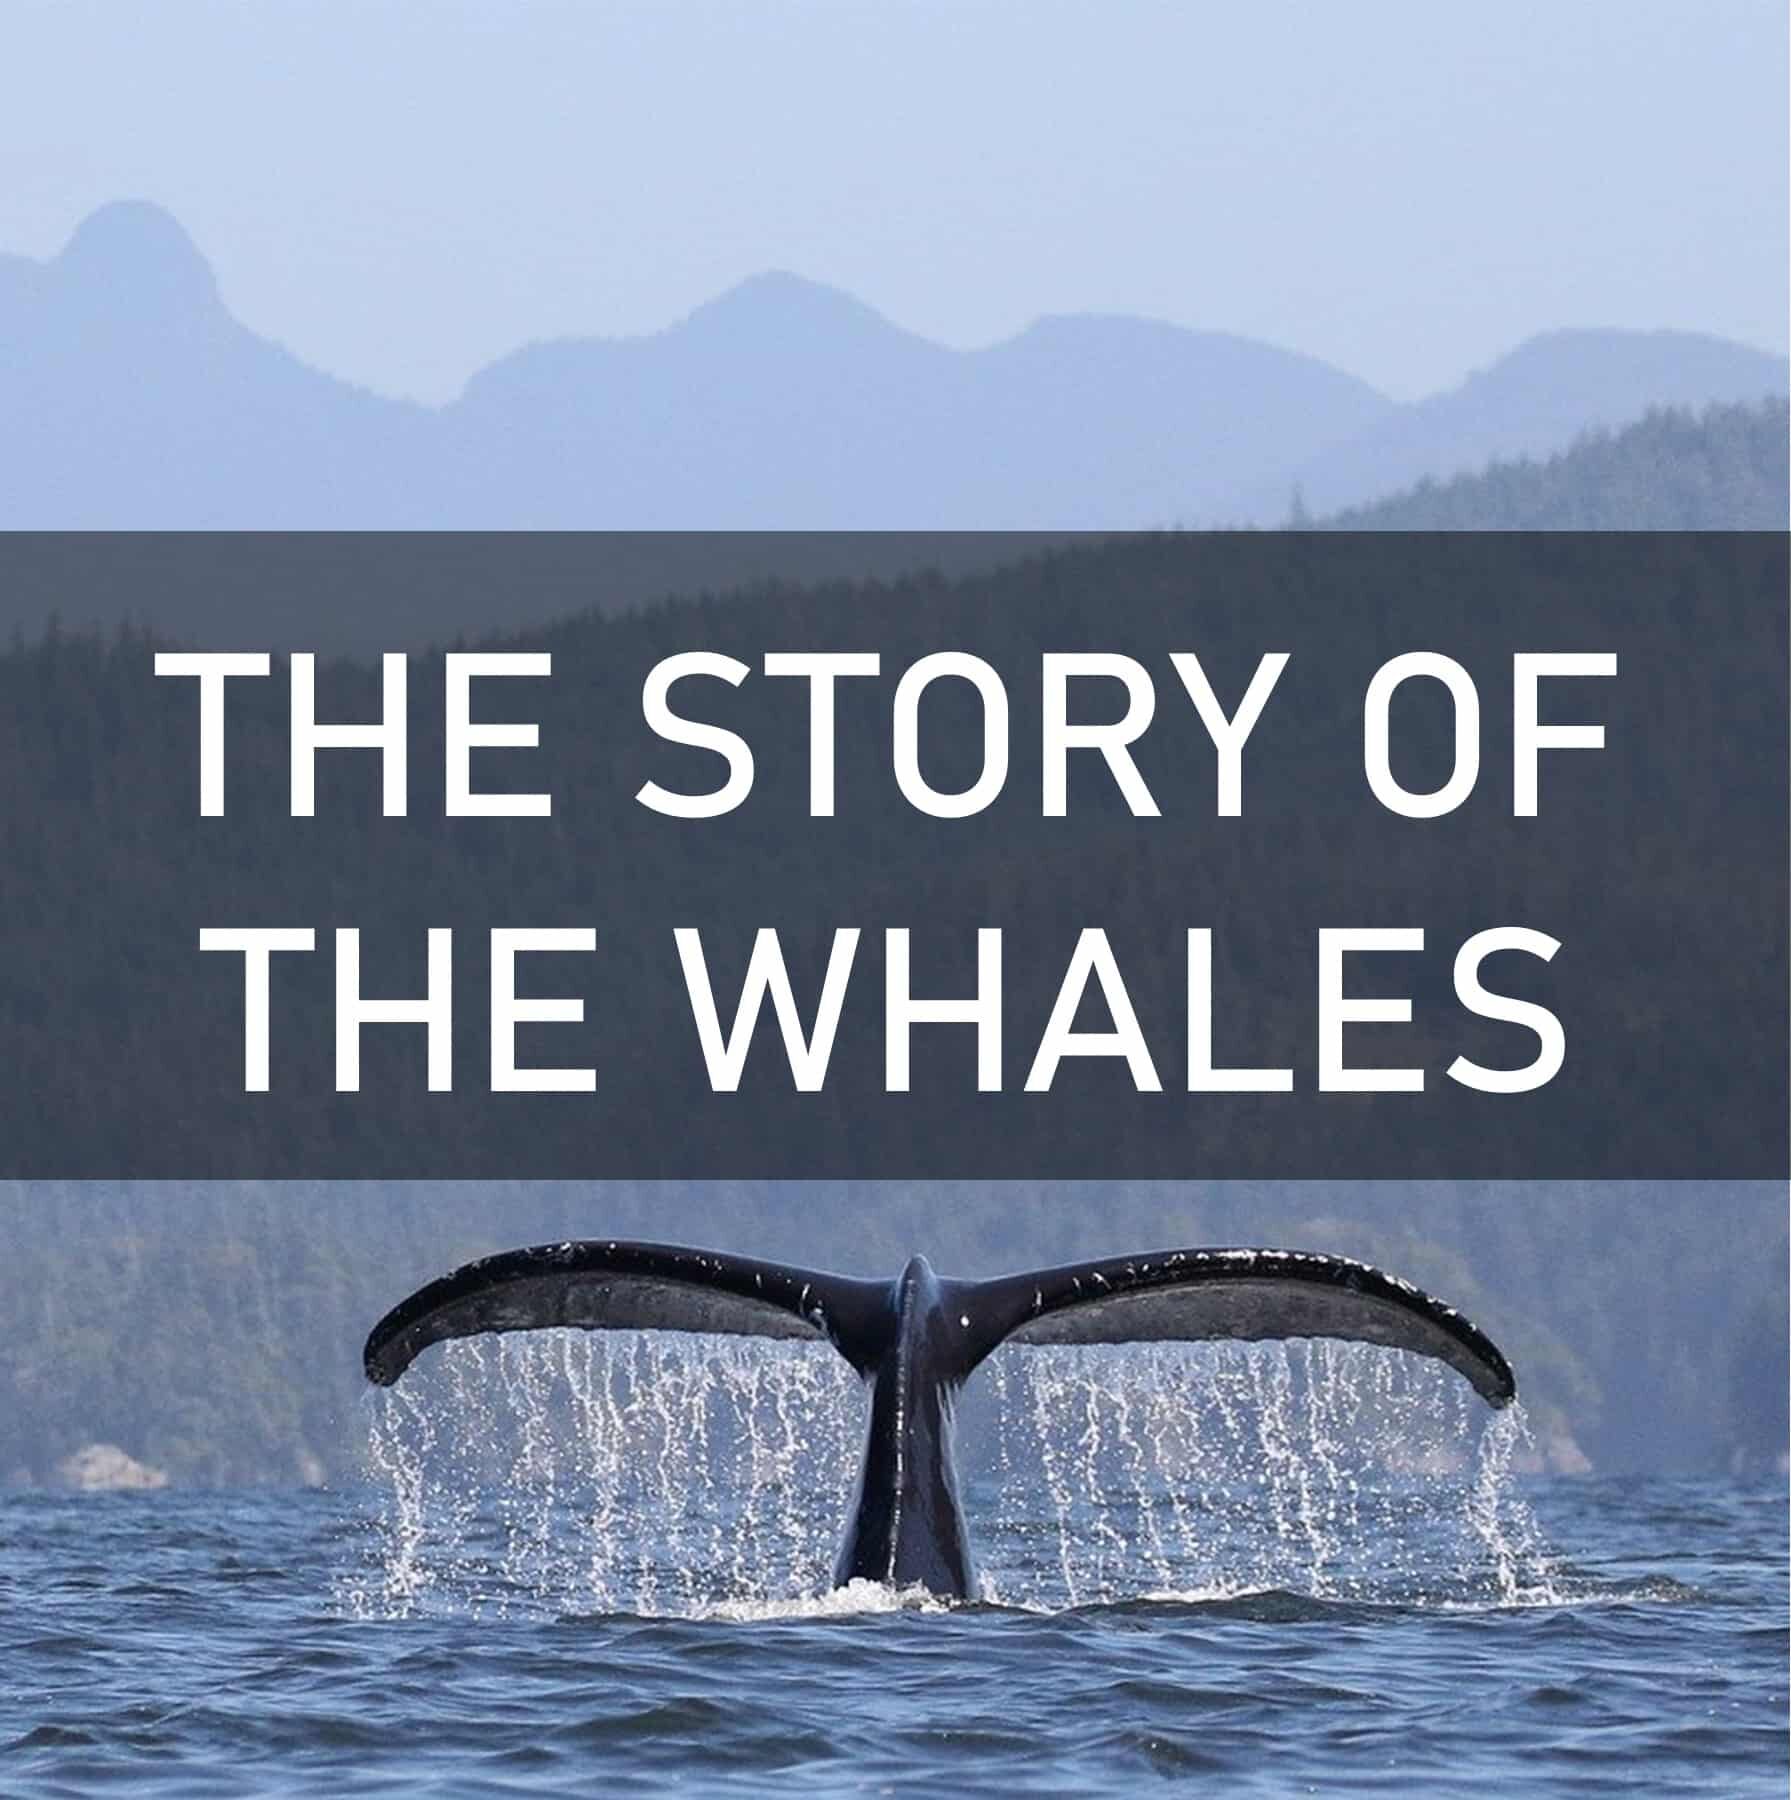 Whale tail rising out of the water with the text "The Story of the Whales"